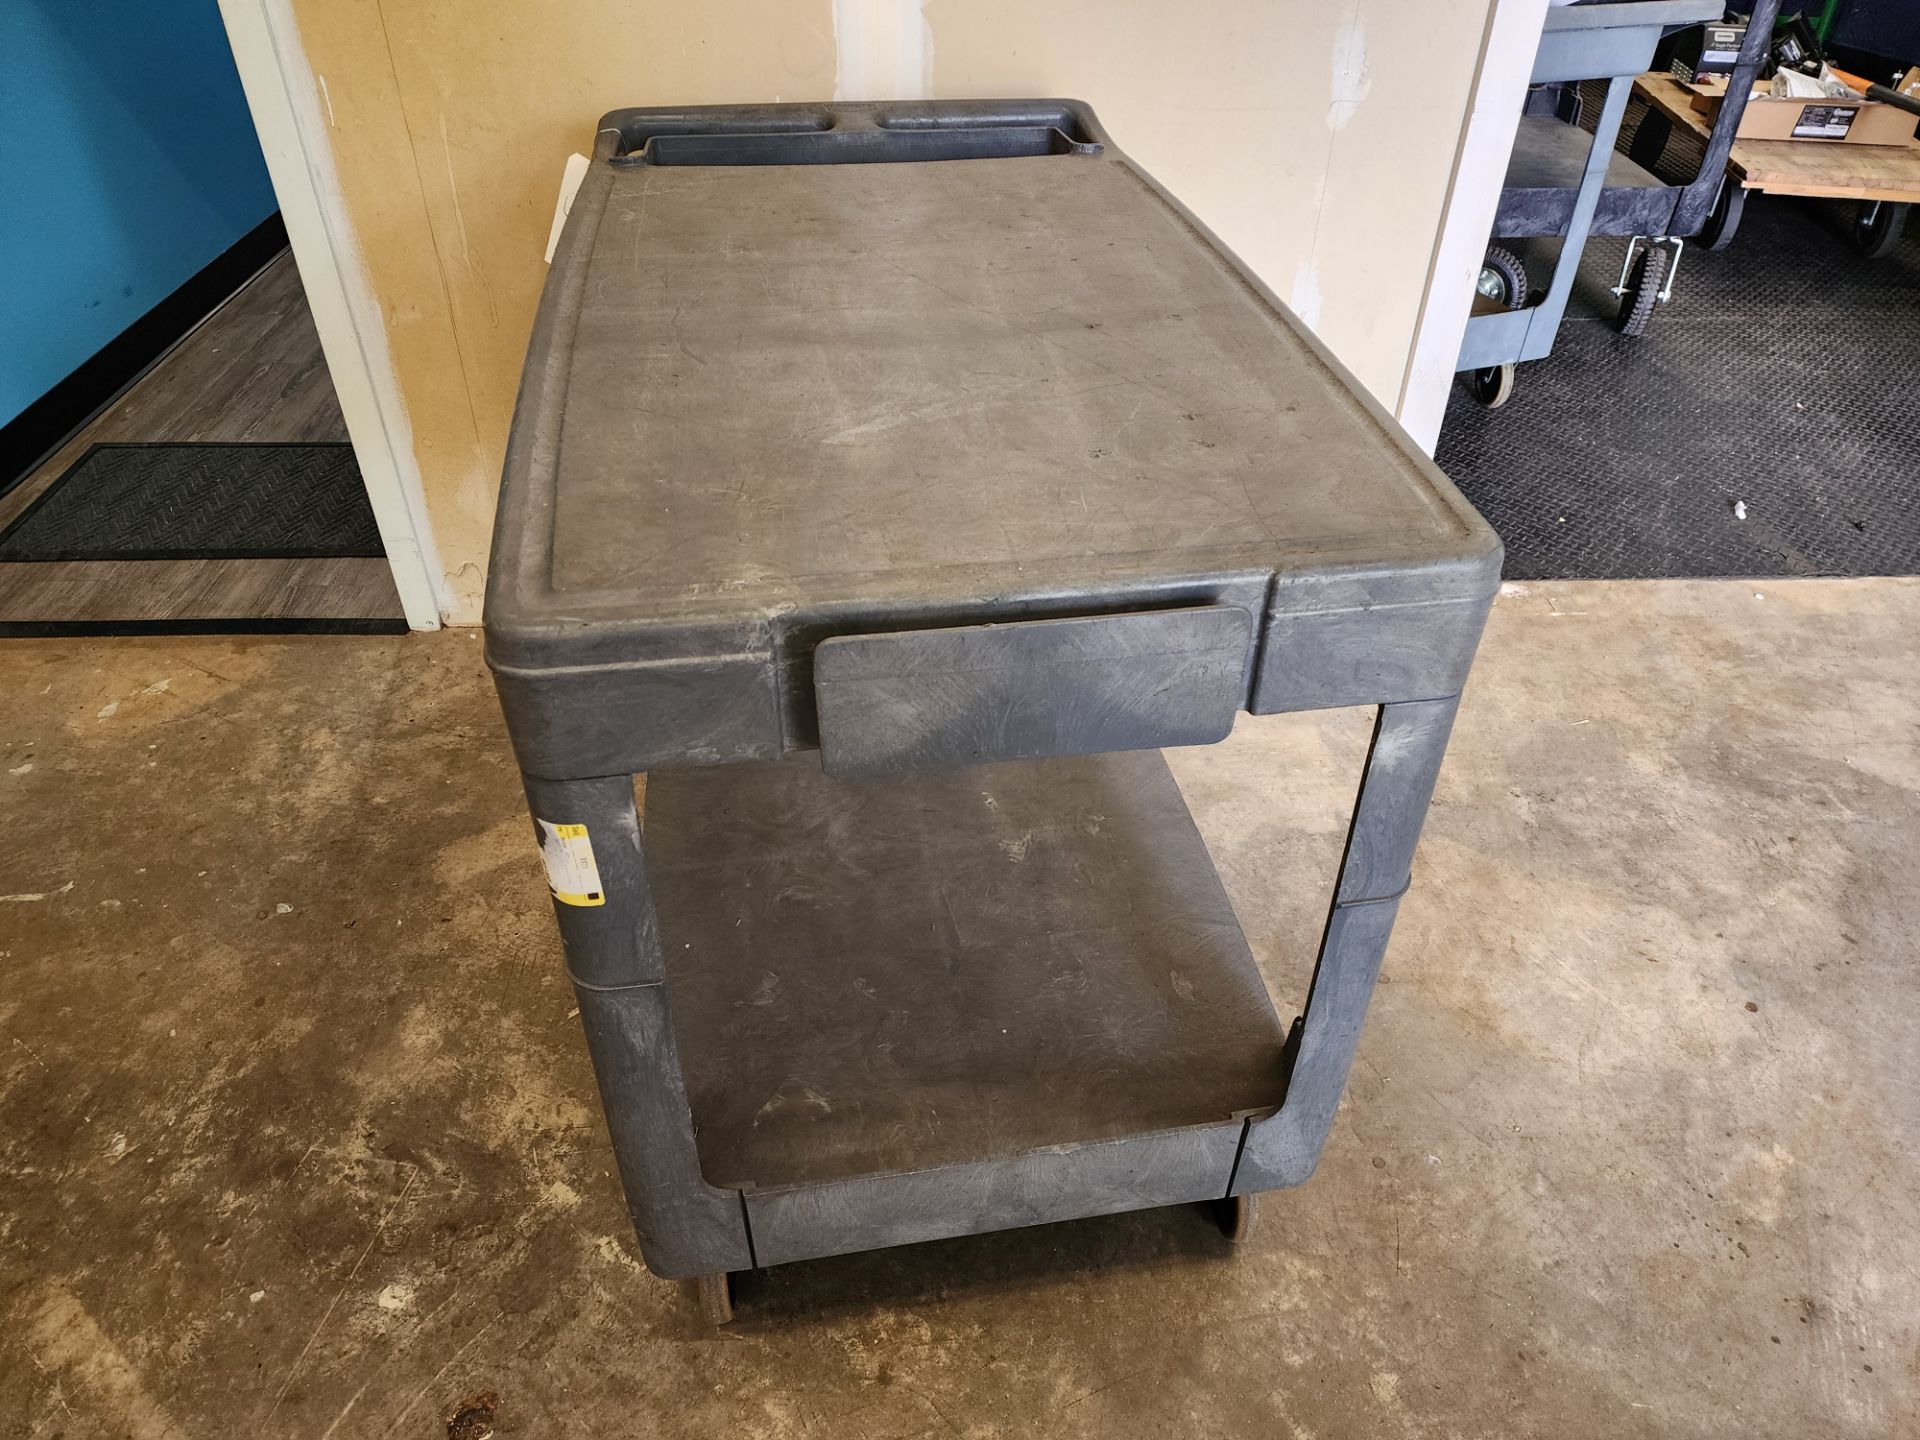 Gray Rubbermaid Utility Cart, 2-Tier, 25"x36" - Image 3 of 3